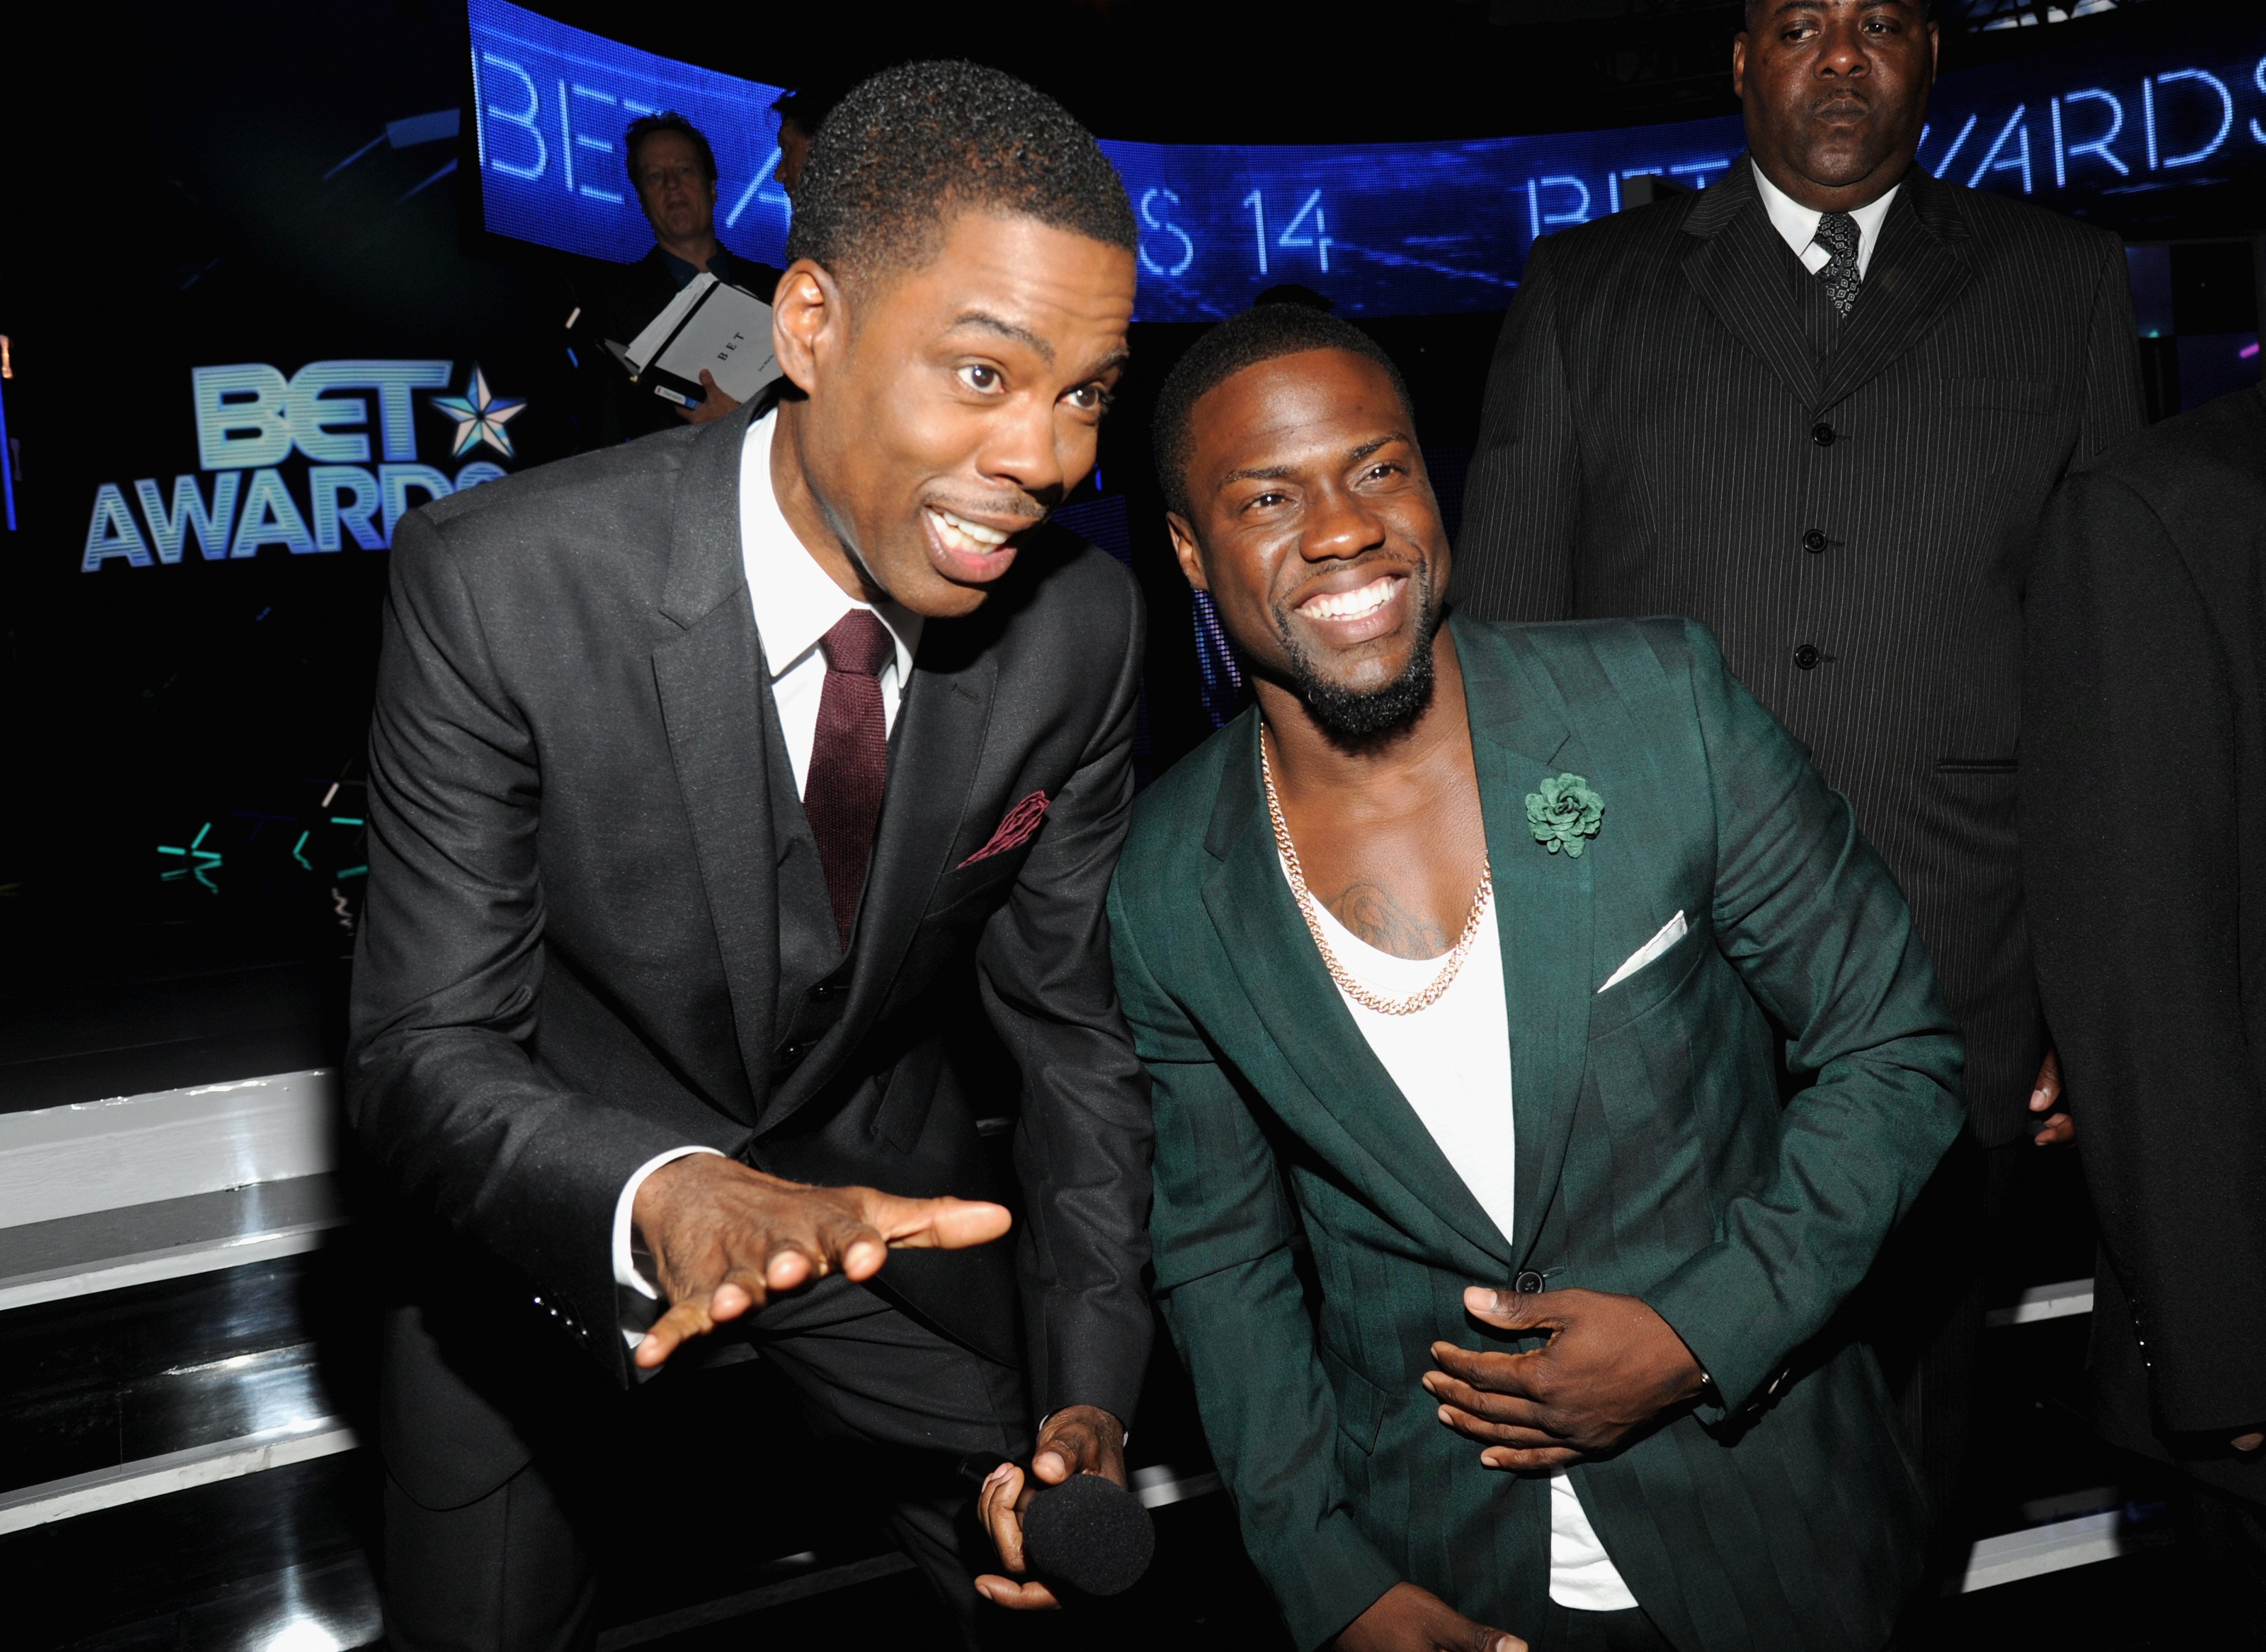 Comedians Chris Rock and Kevin Hart attend the 2014 BET Awards